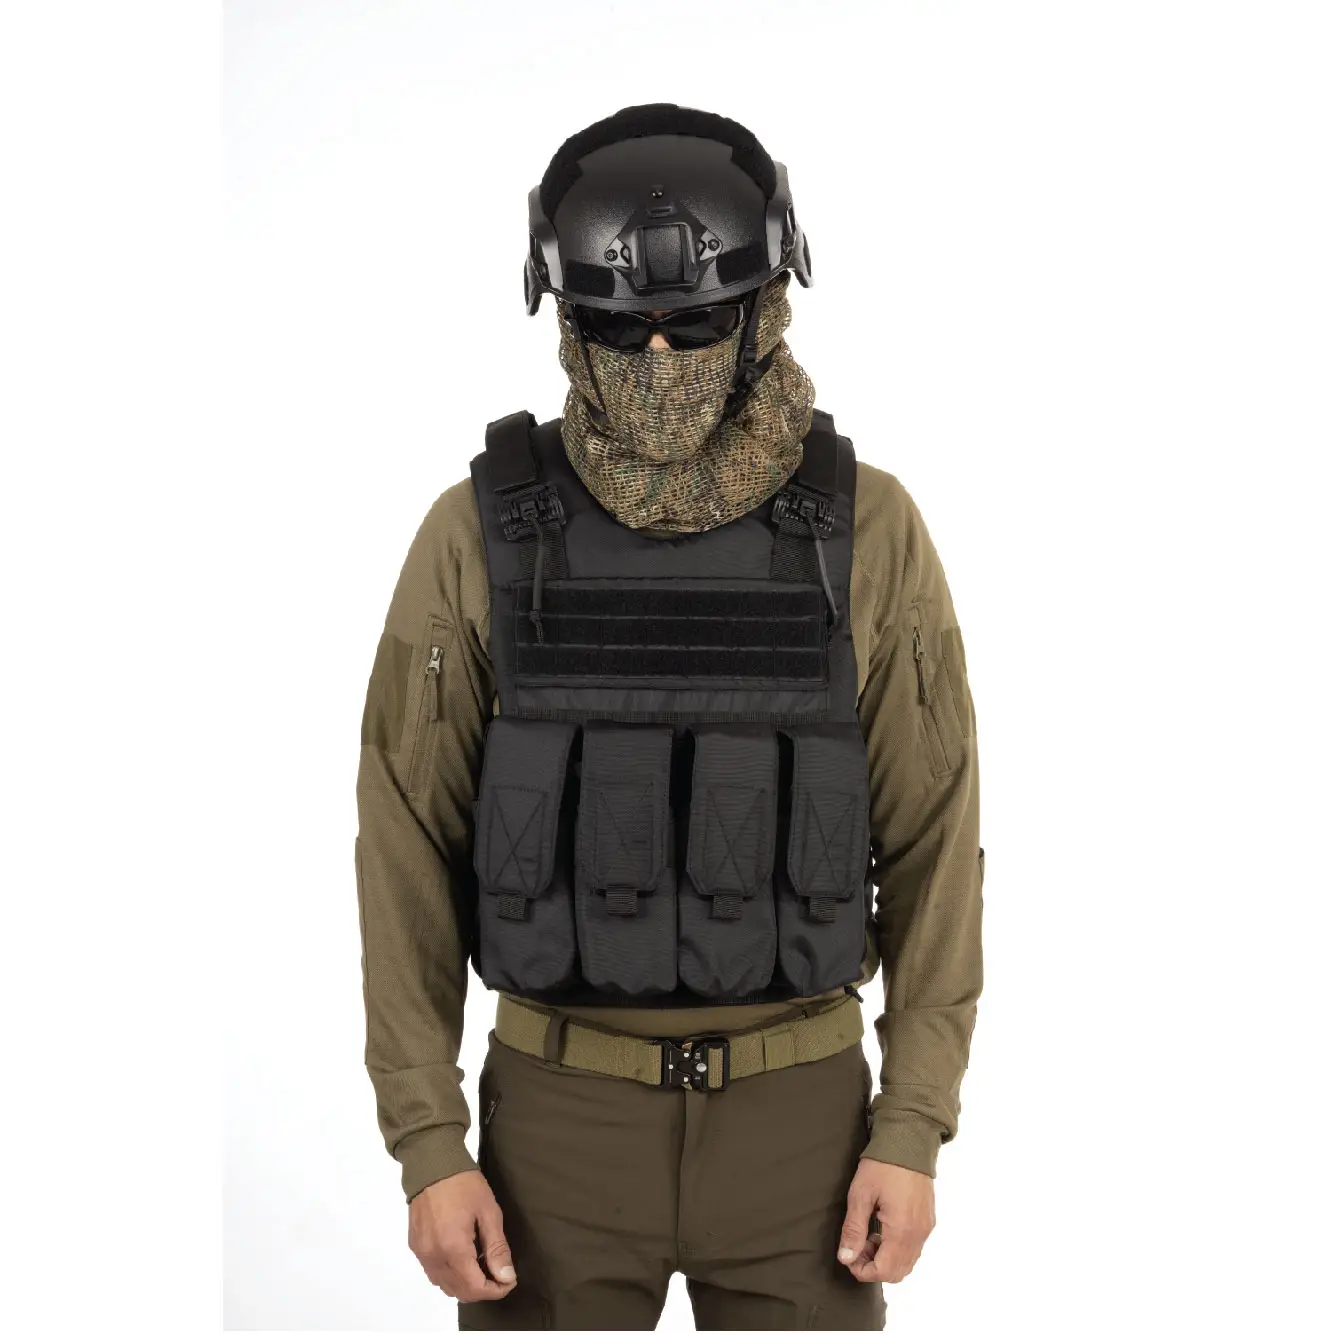 Tactical Vest with Advanced Modular Armor System for Ultimate Protection Comfort and Versatility in High-Stakes Operations